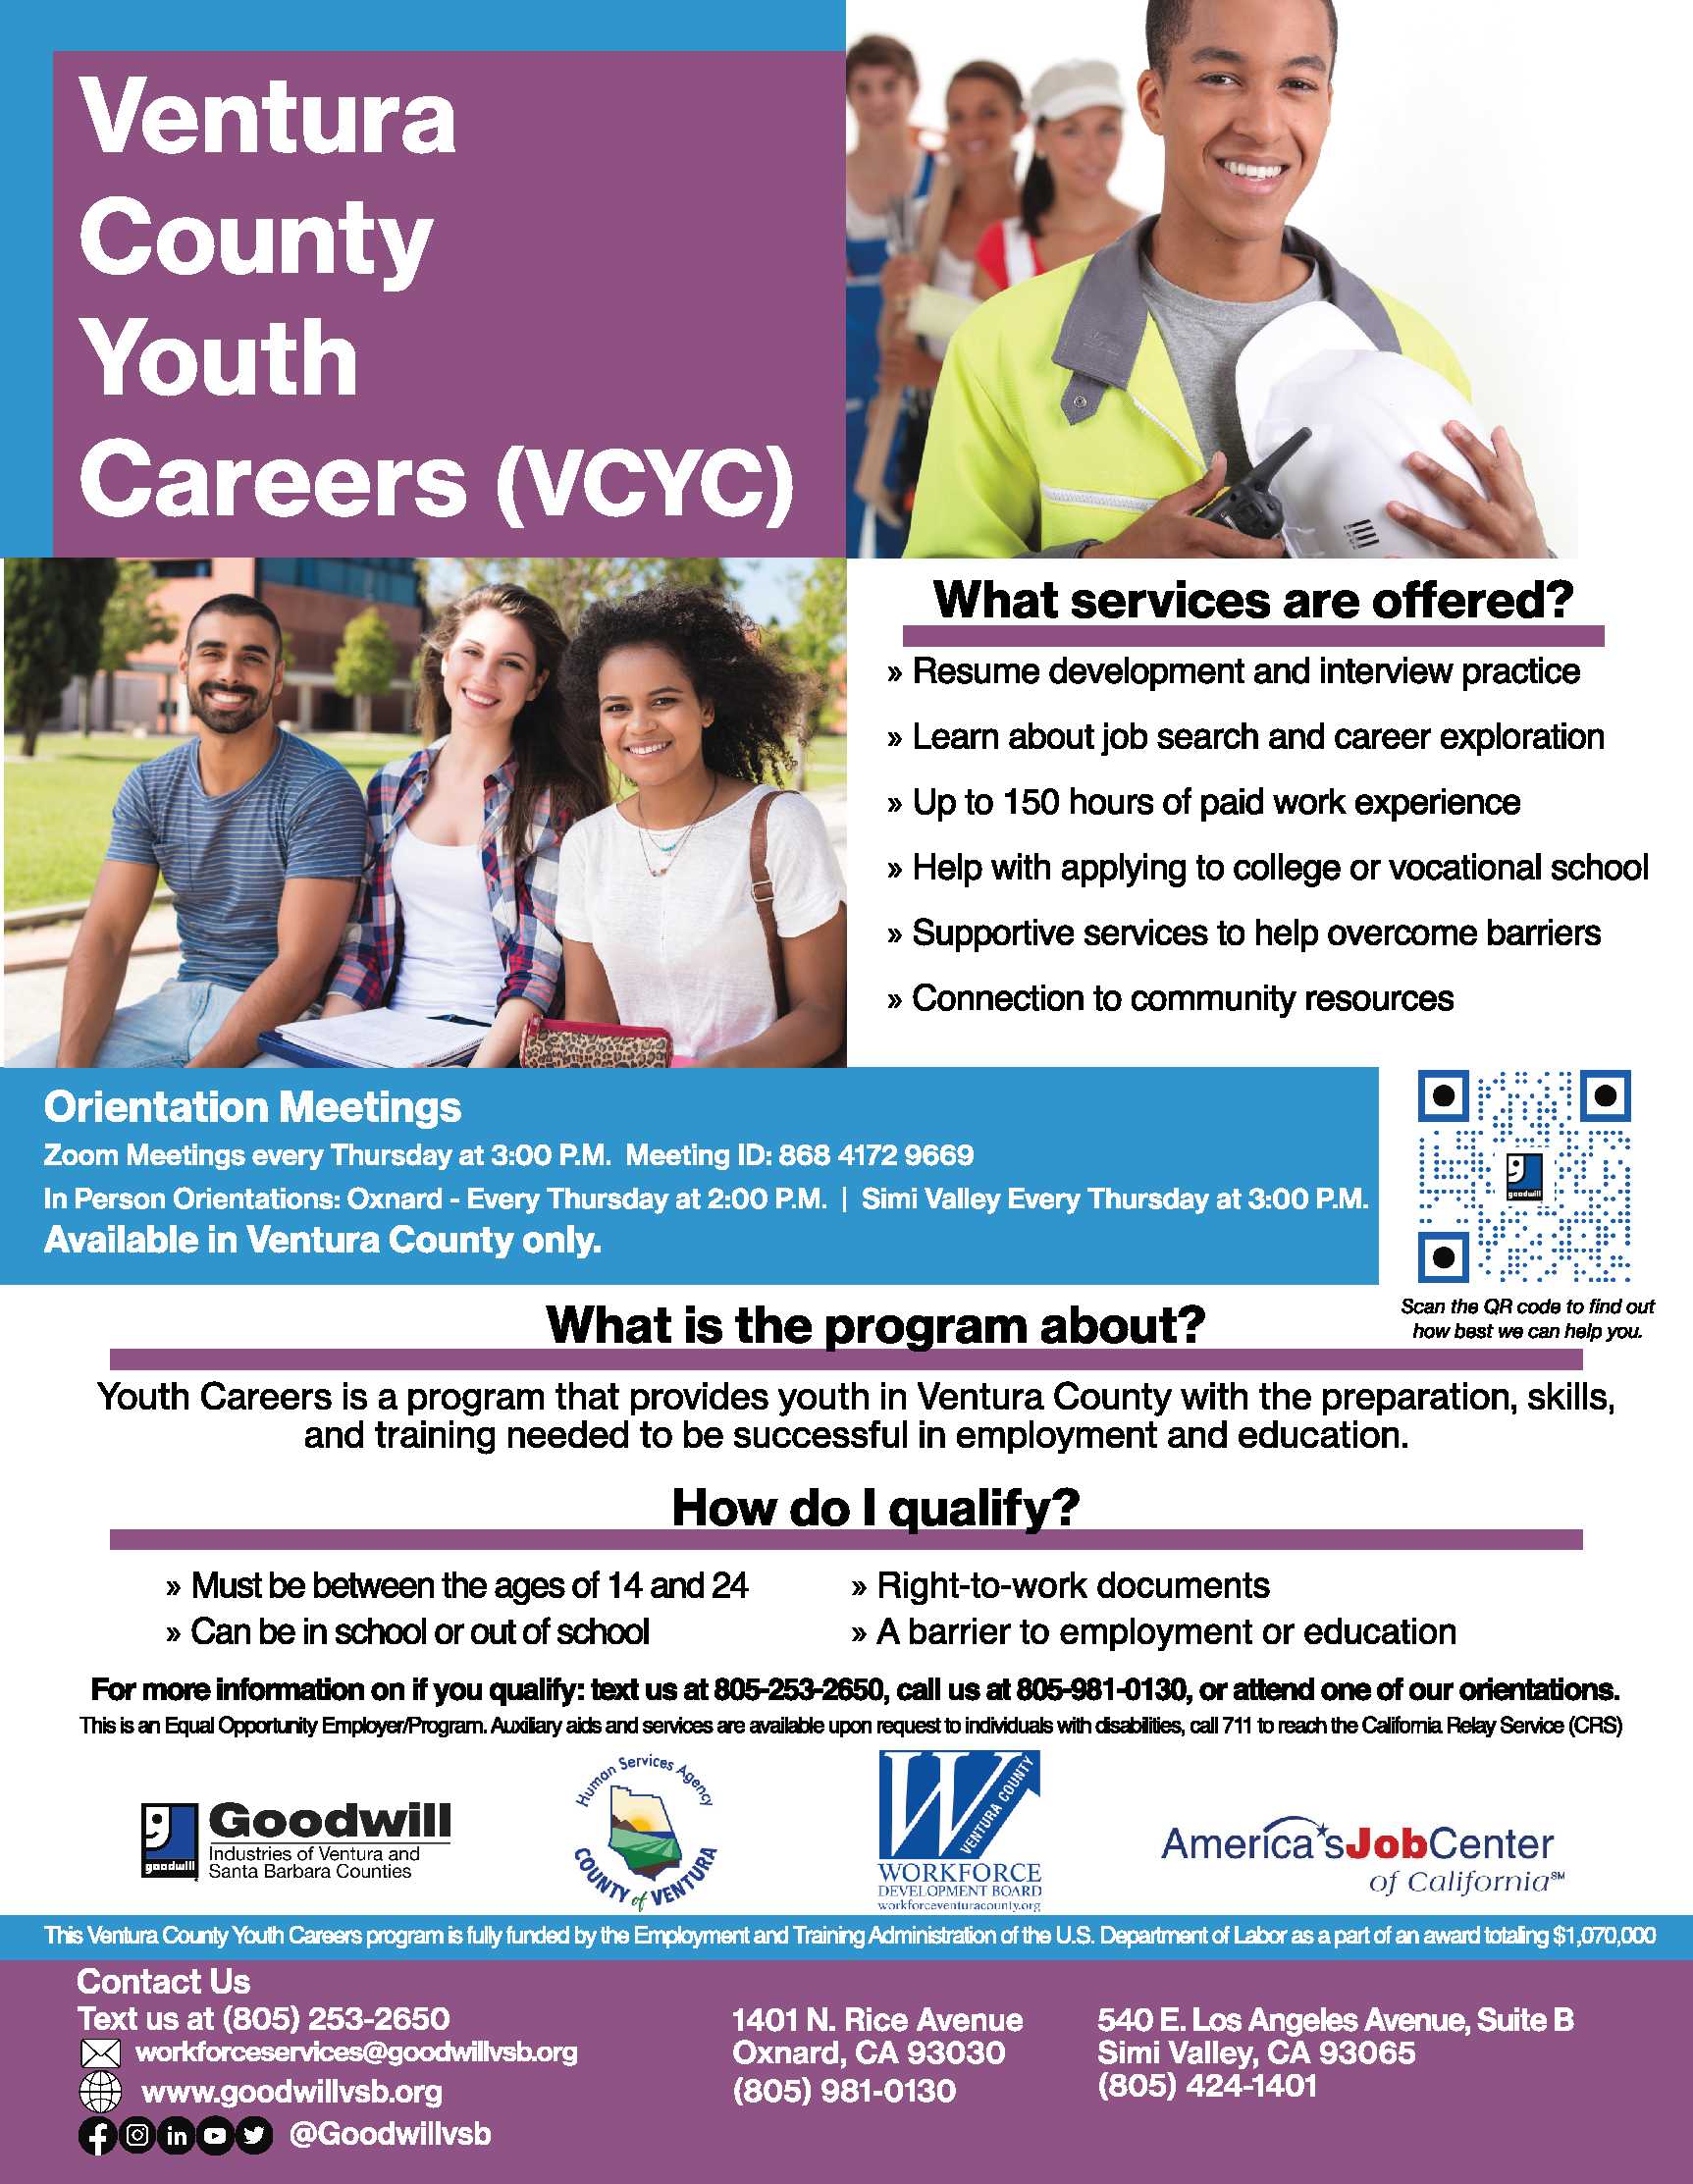 Ventura County Youth Careers (VCYC) is a program that provides youth in Ventura County with the preparation, skills, and training needed to be successful in employment and education. For more information on if you qualify: text us at 805-253-2650, call us at 805-981-0130, or attend one of our orientations.